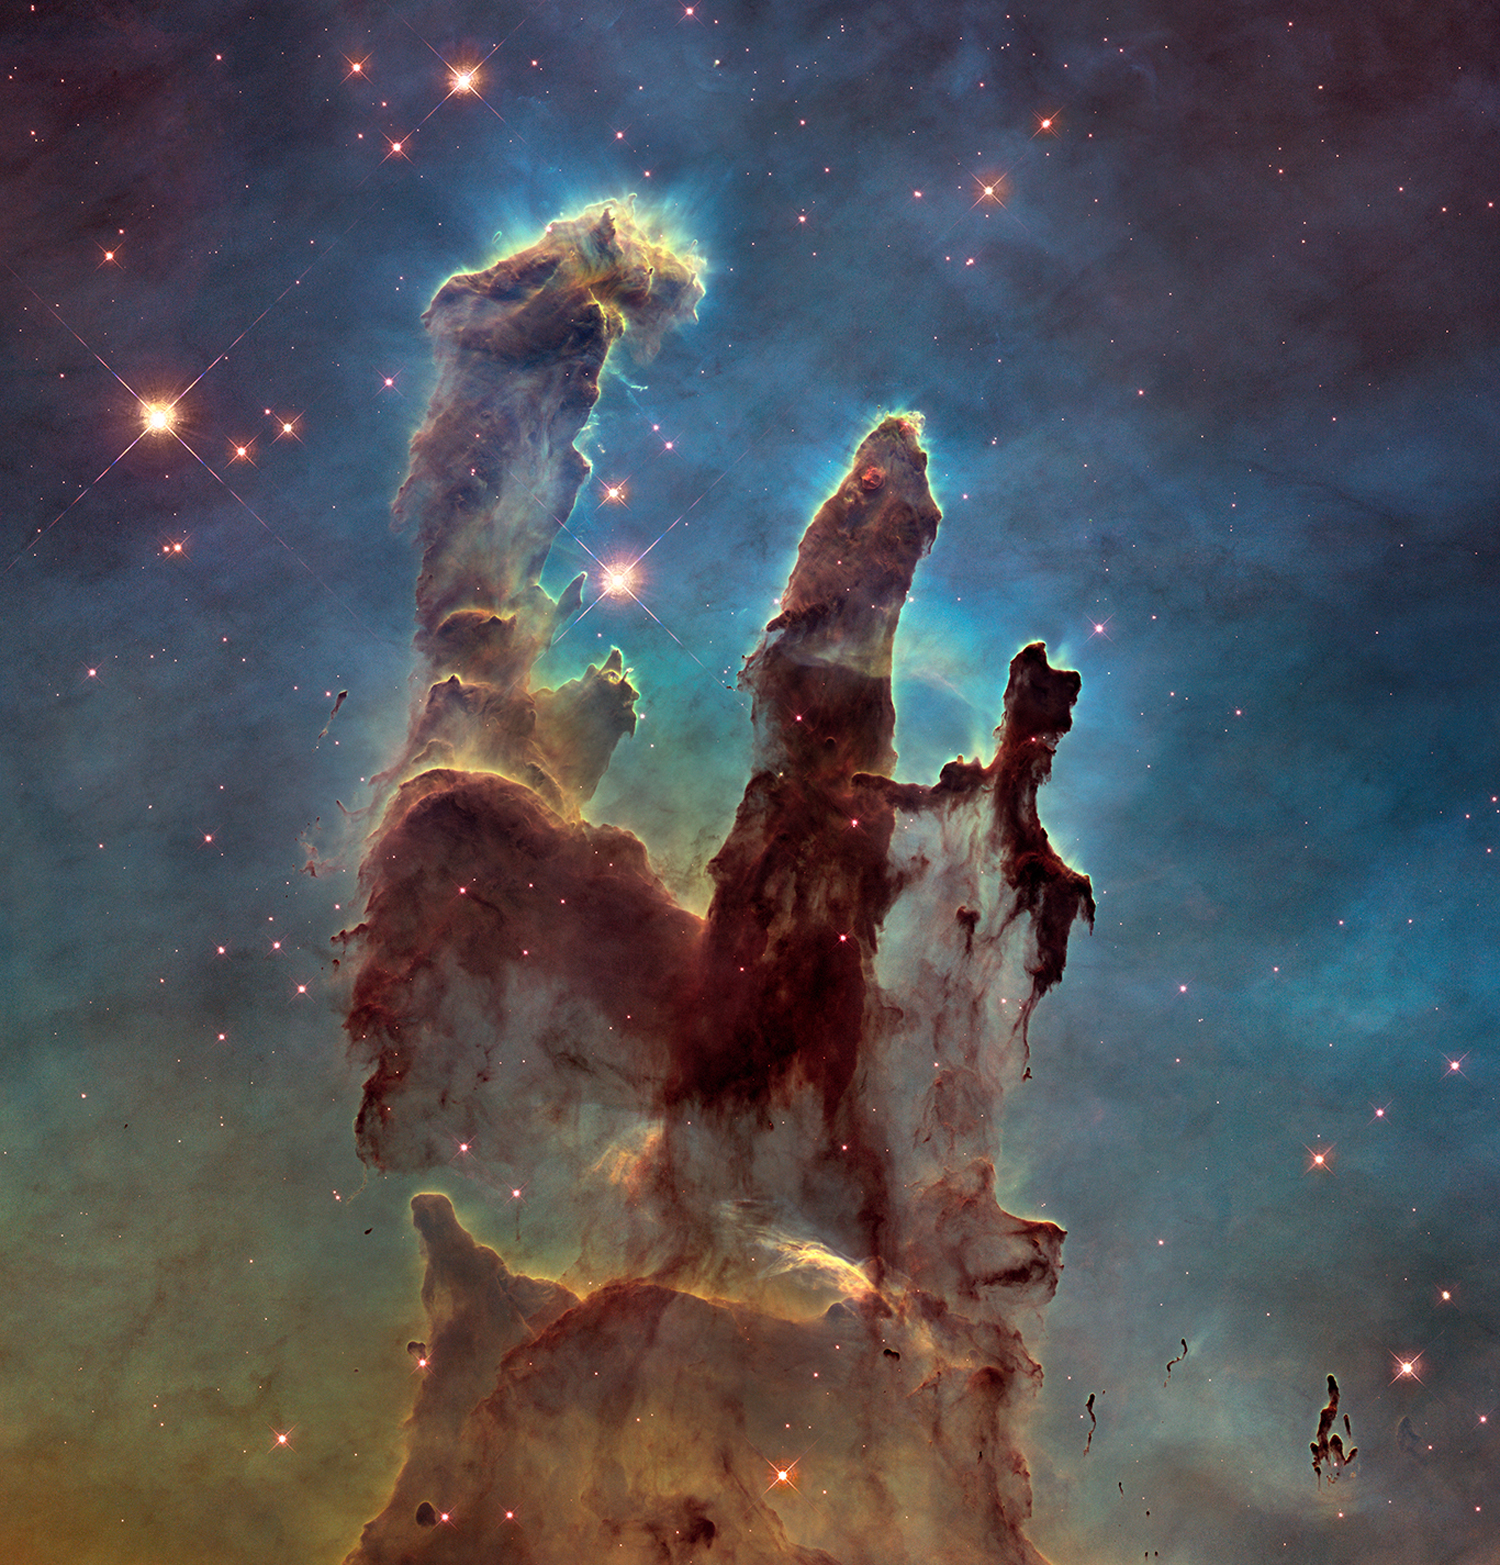 These are our top space images of all time